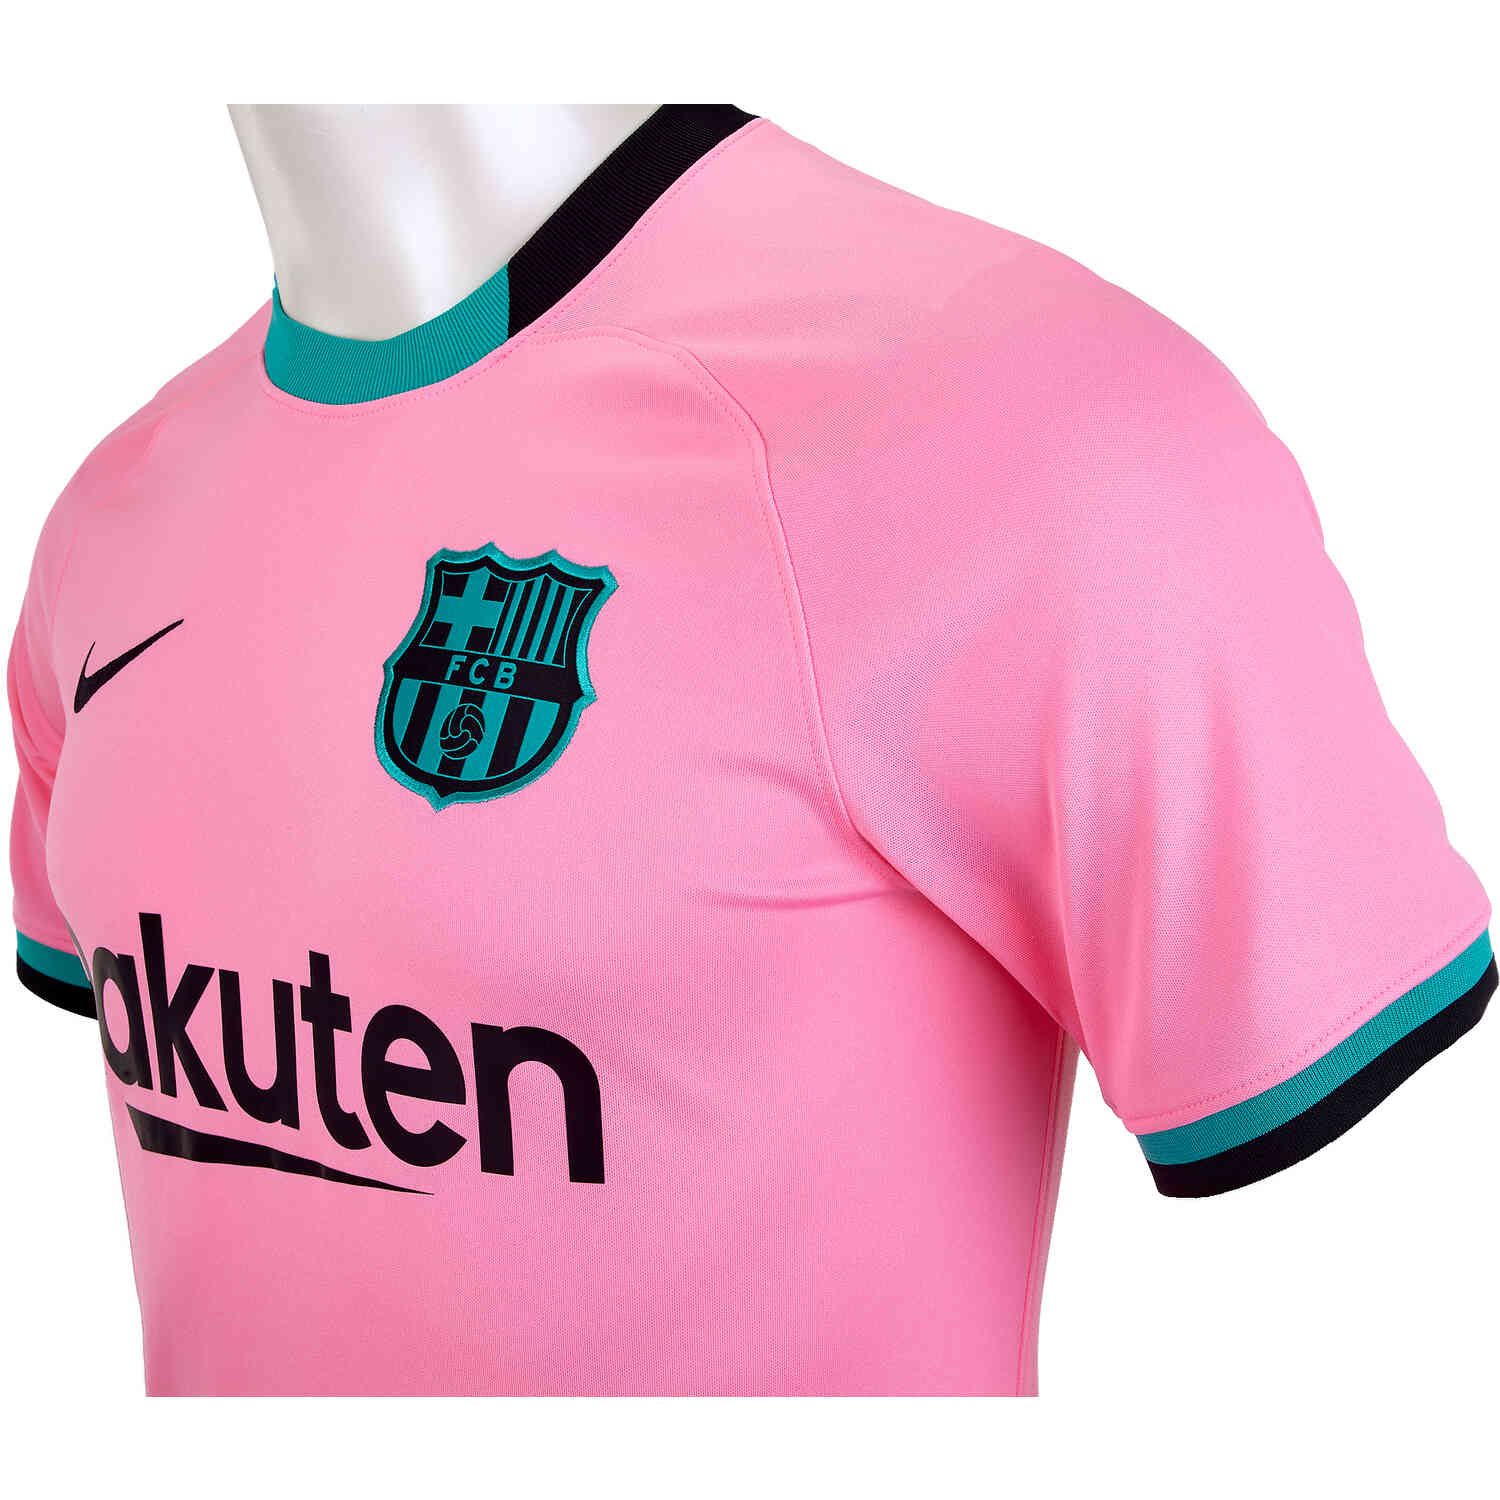 NIKE LIONEL MESSI FC BARCELONA AWAY JERSEY 2020/21